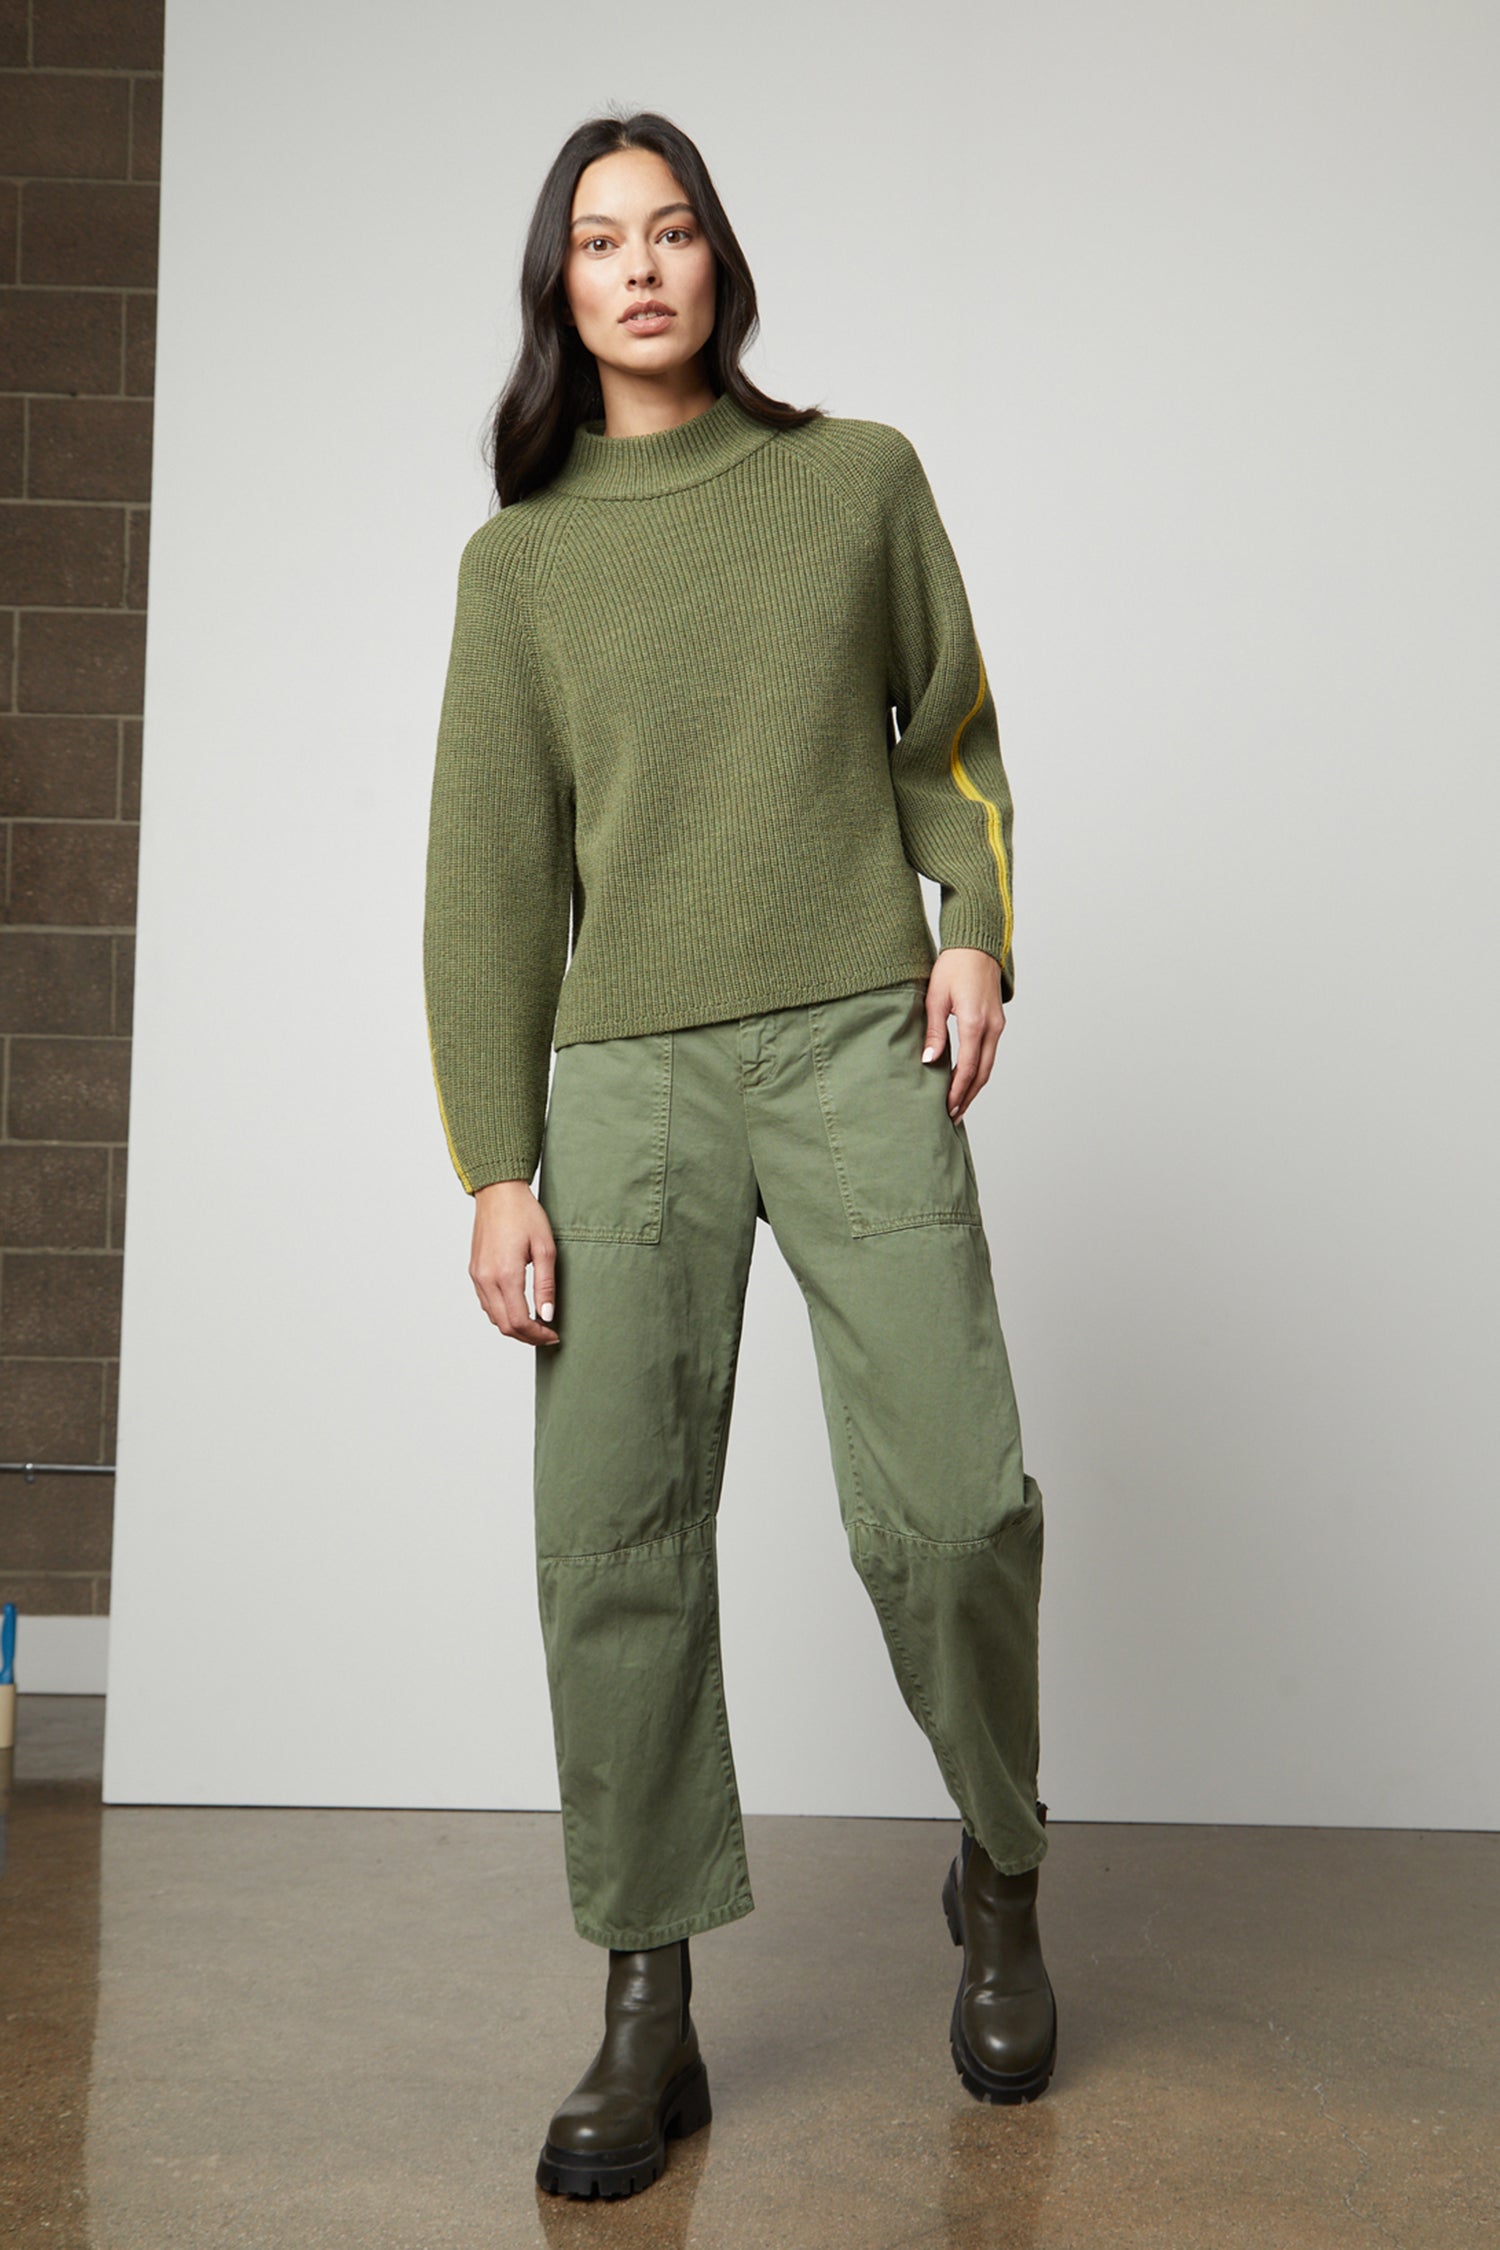   The model is wearing a comfortable TEAGAN MOCK NECK SWEATER by Velvet by Graham & Spencer. 